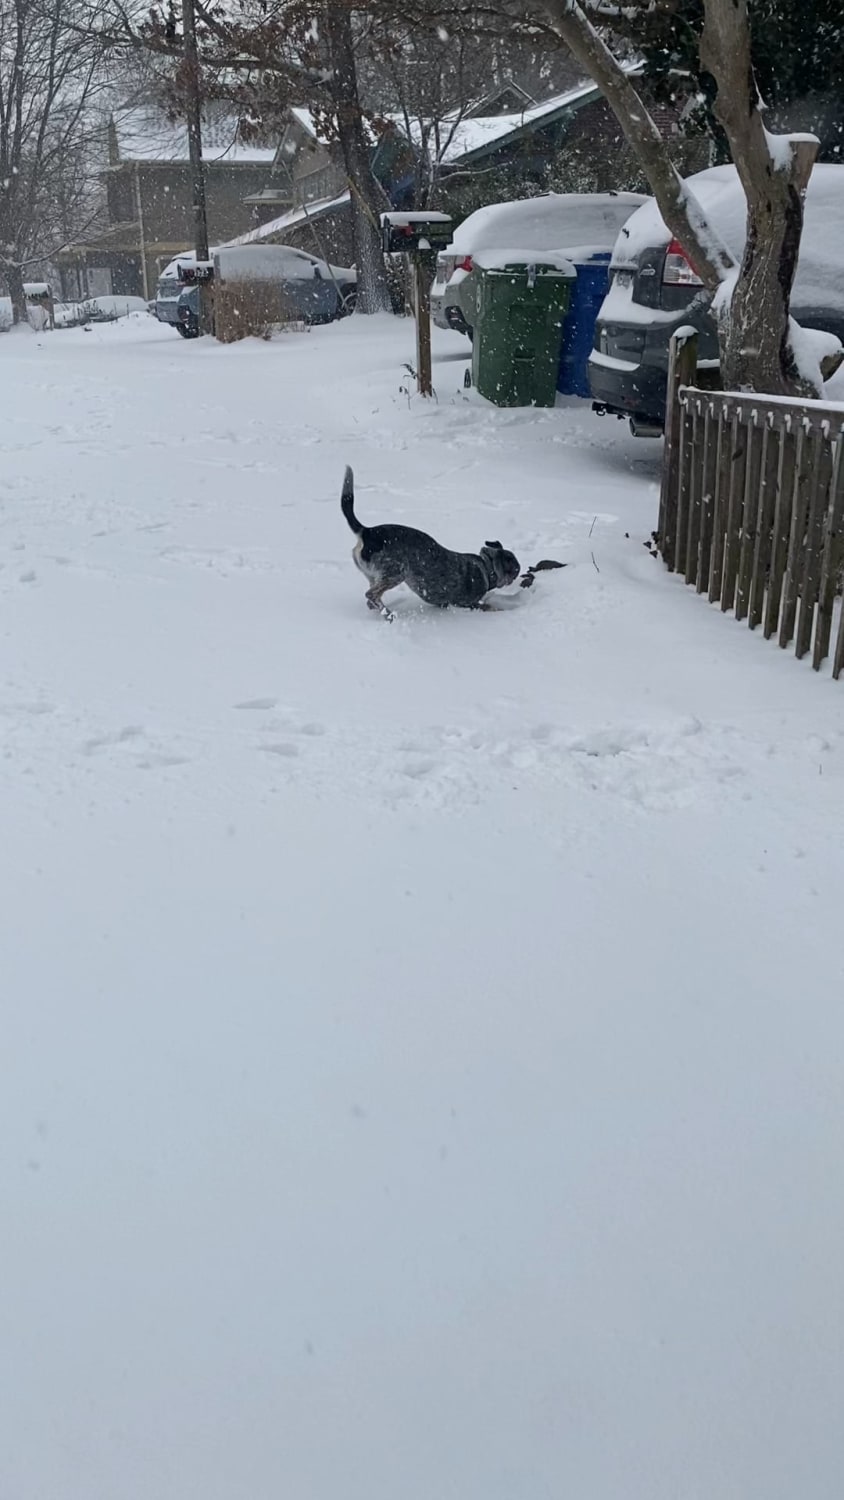 Our little Australian Cattle Dachshund couldn’t contain his excitement for our first snow day in over a year